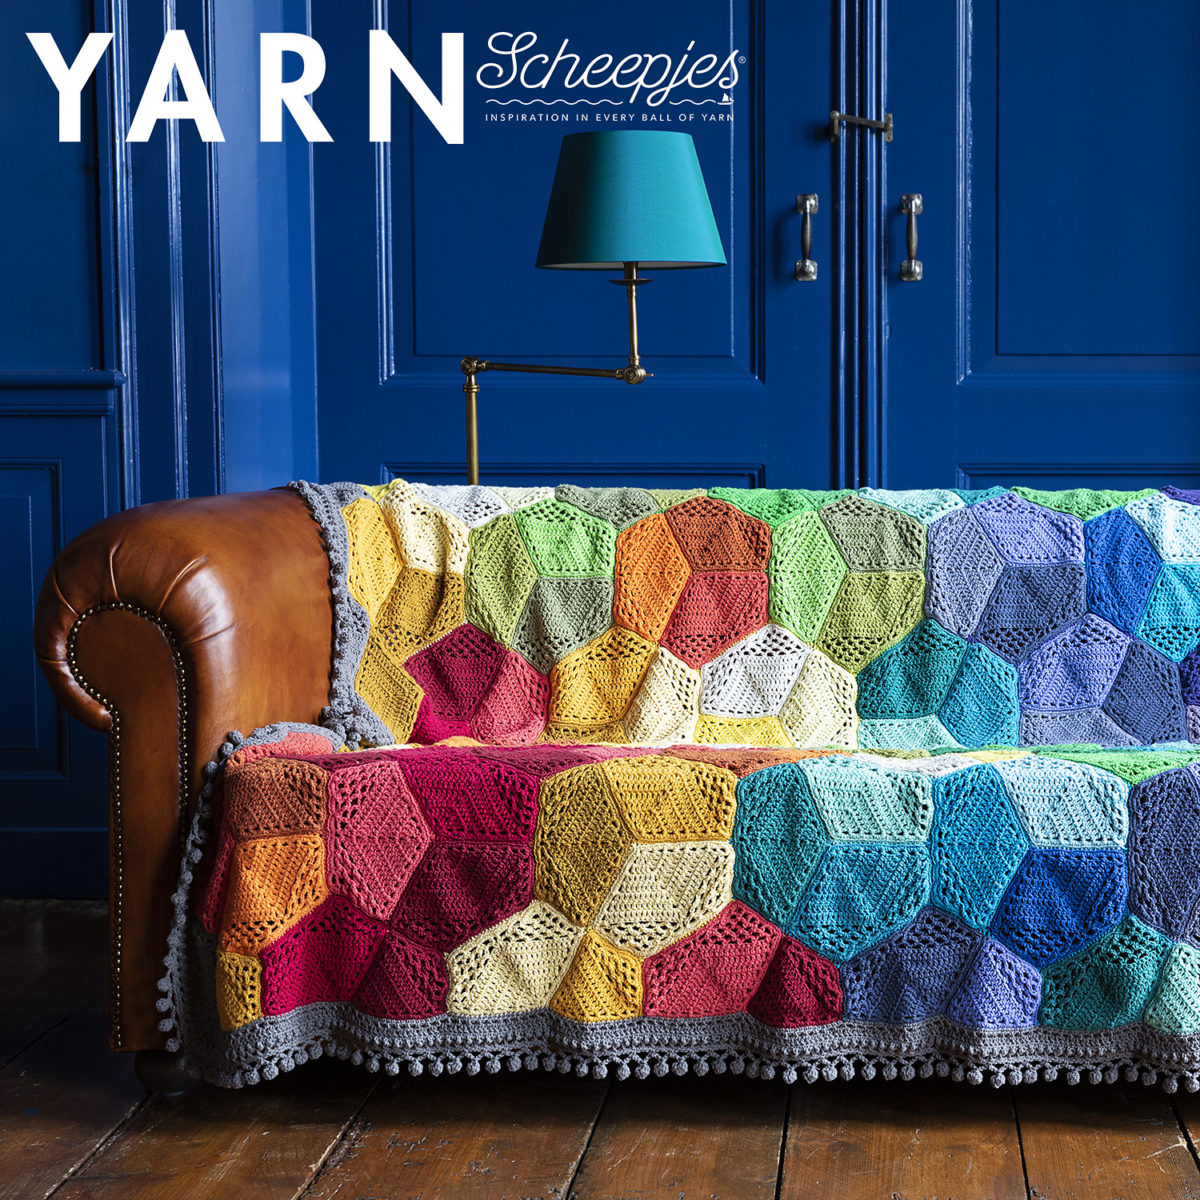 Crochet Patterns for self striping yarn, whirls, & ombre yarns